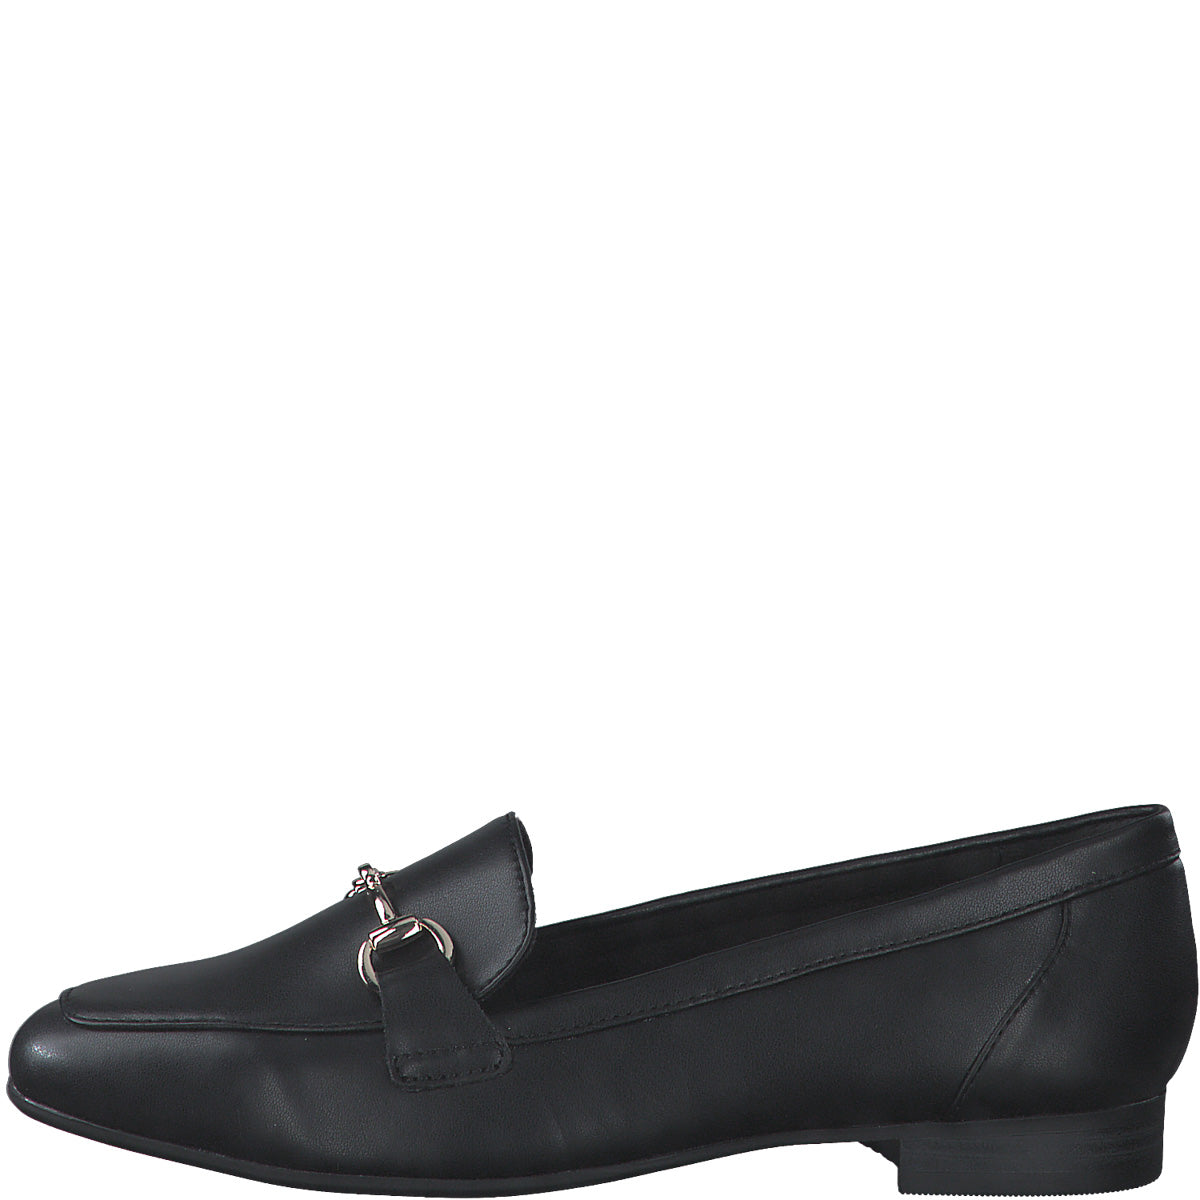 Perfectly Elegant Black Loafers